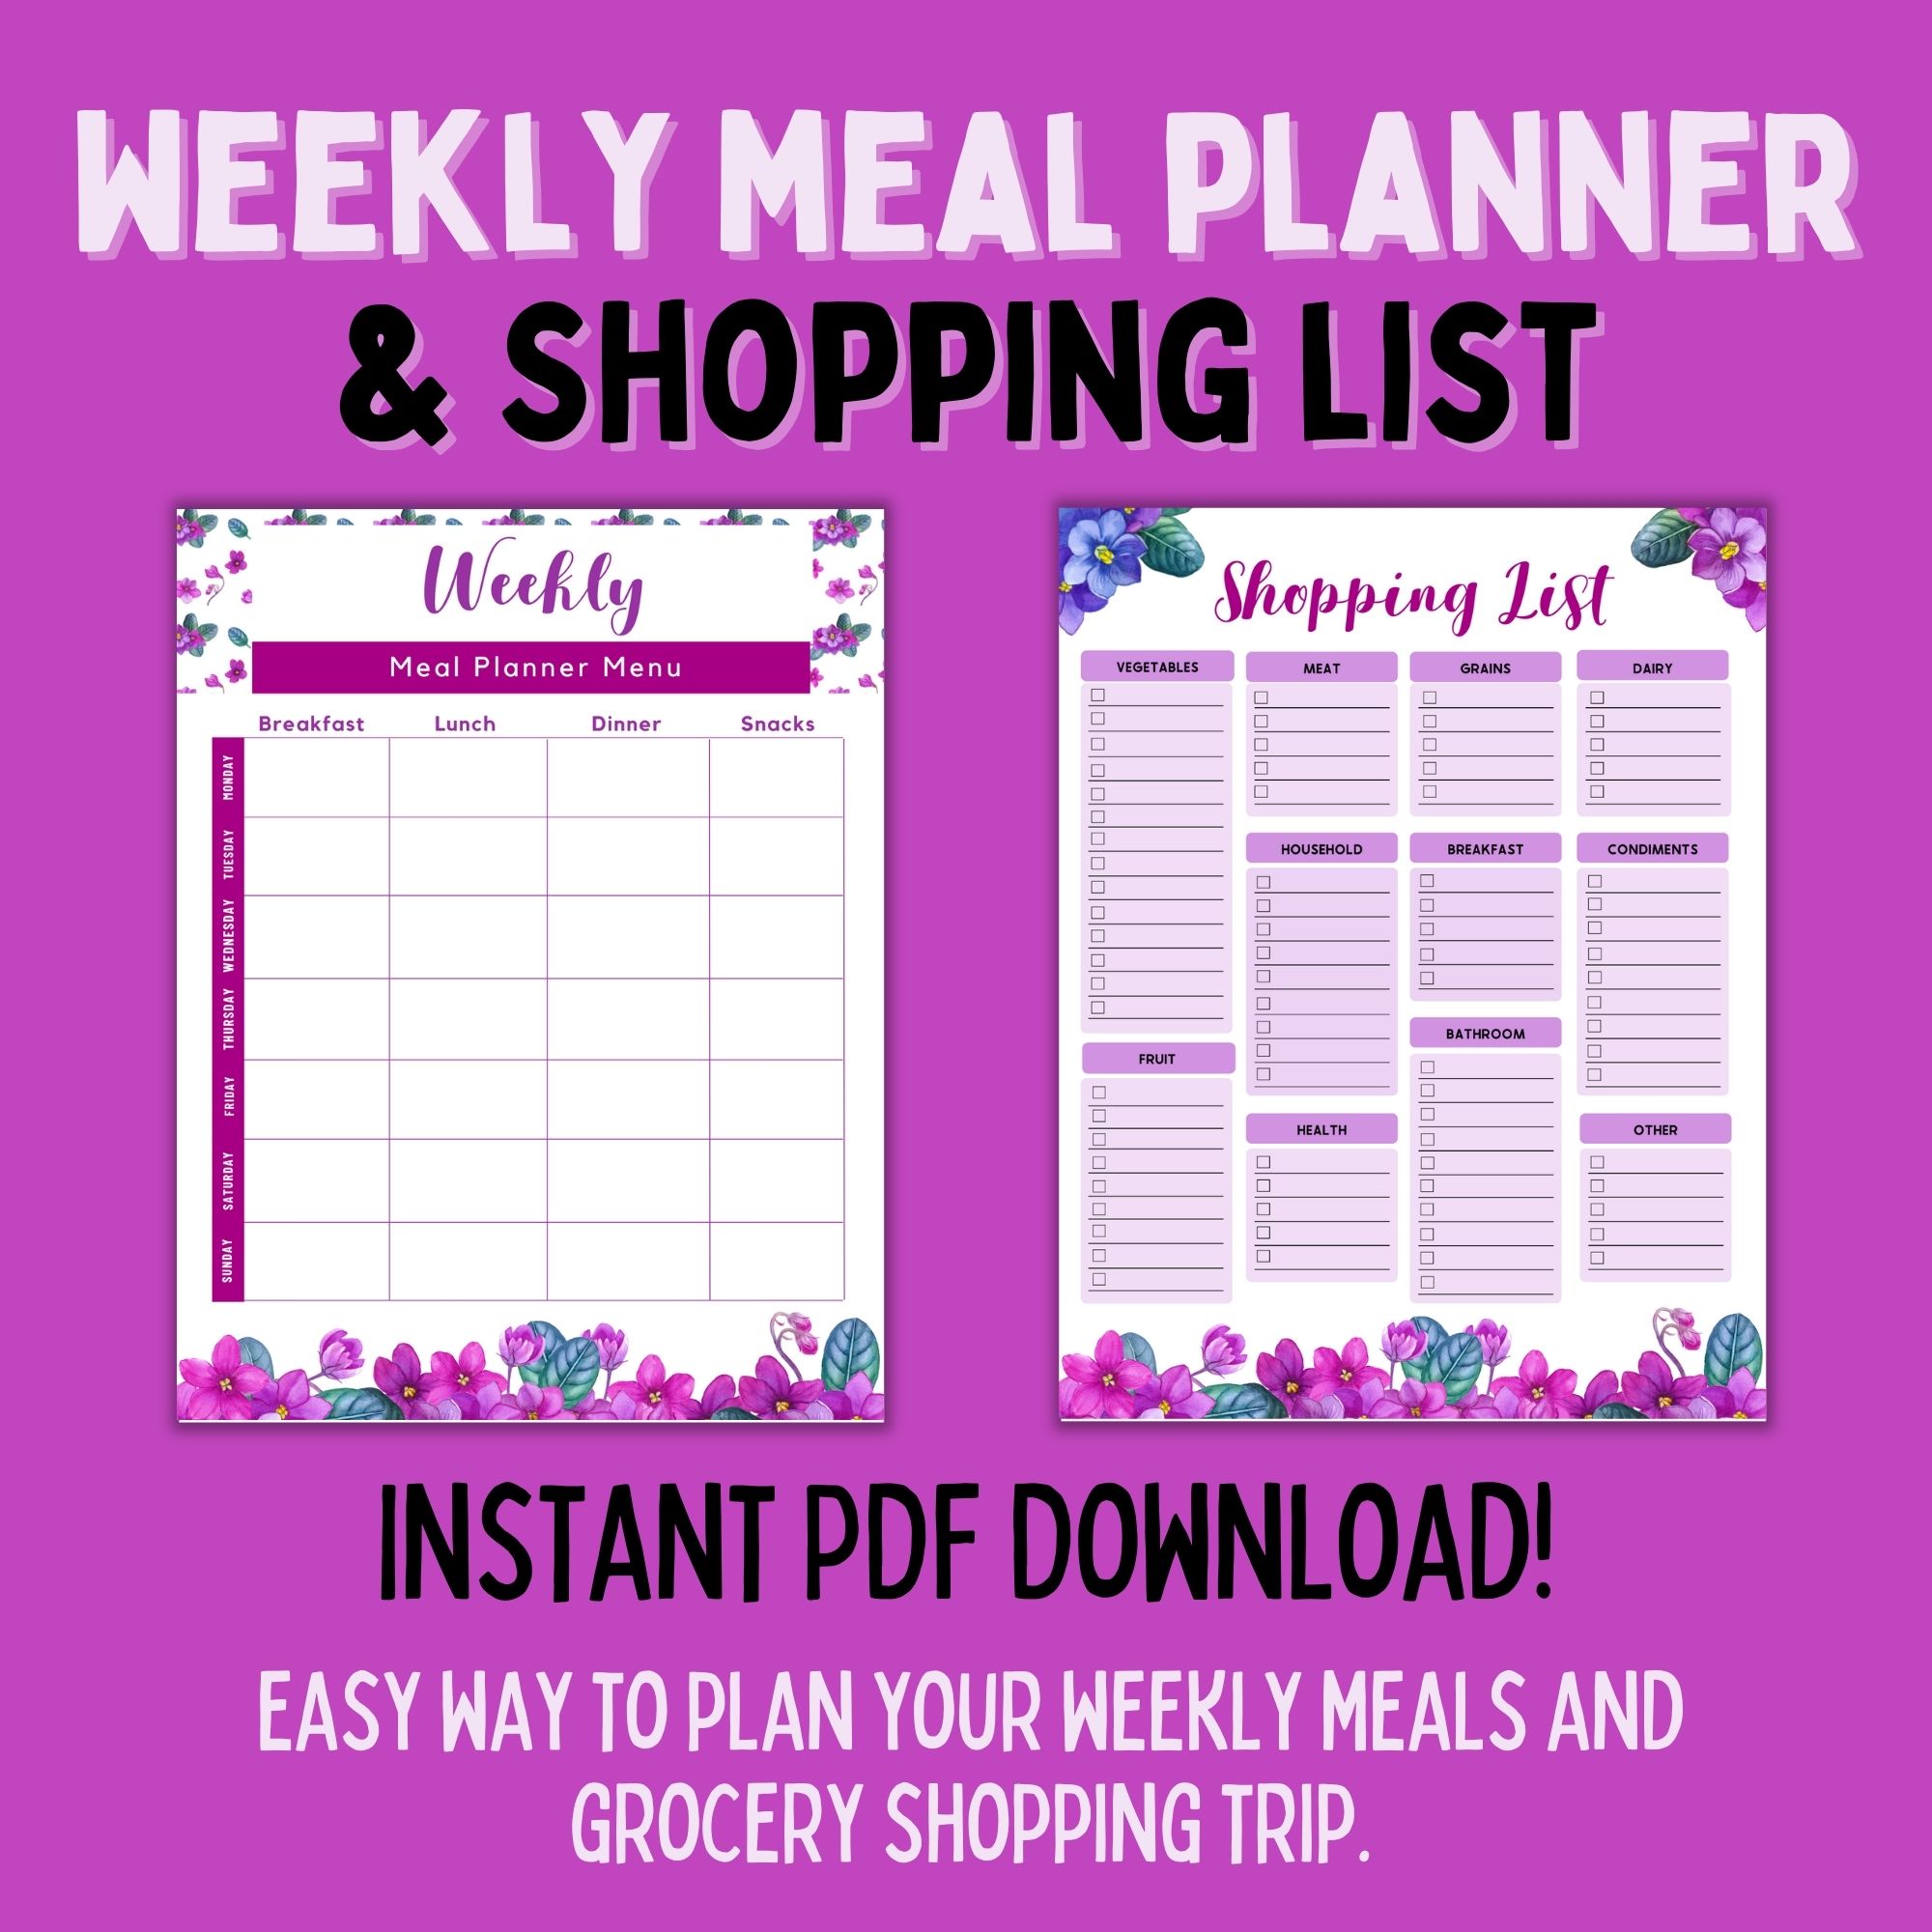 Weekly meal planner and shopping list printable pages.